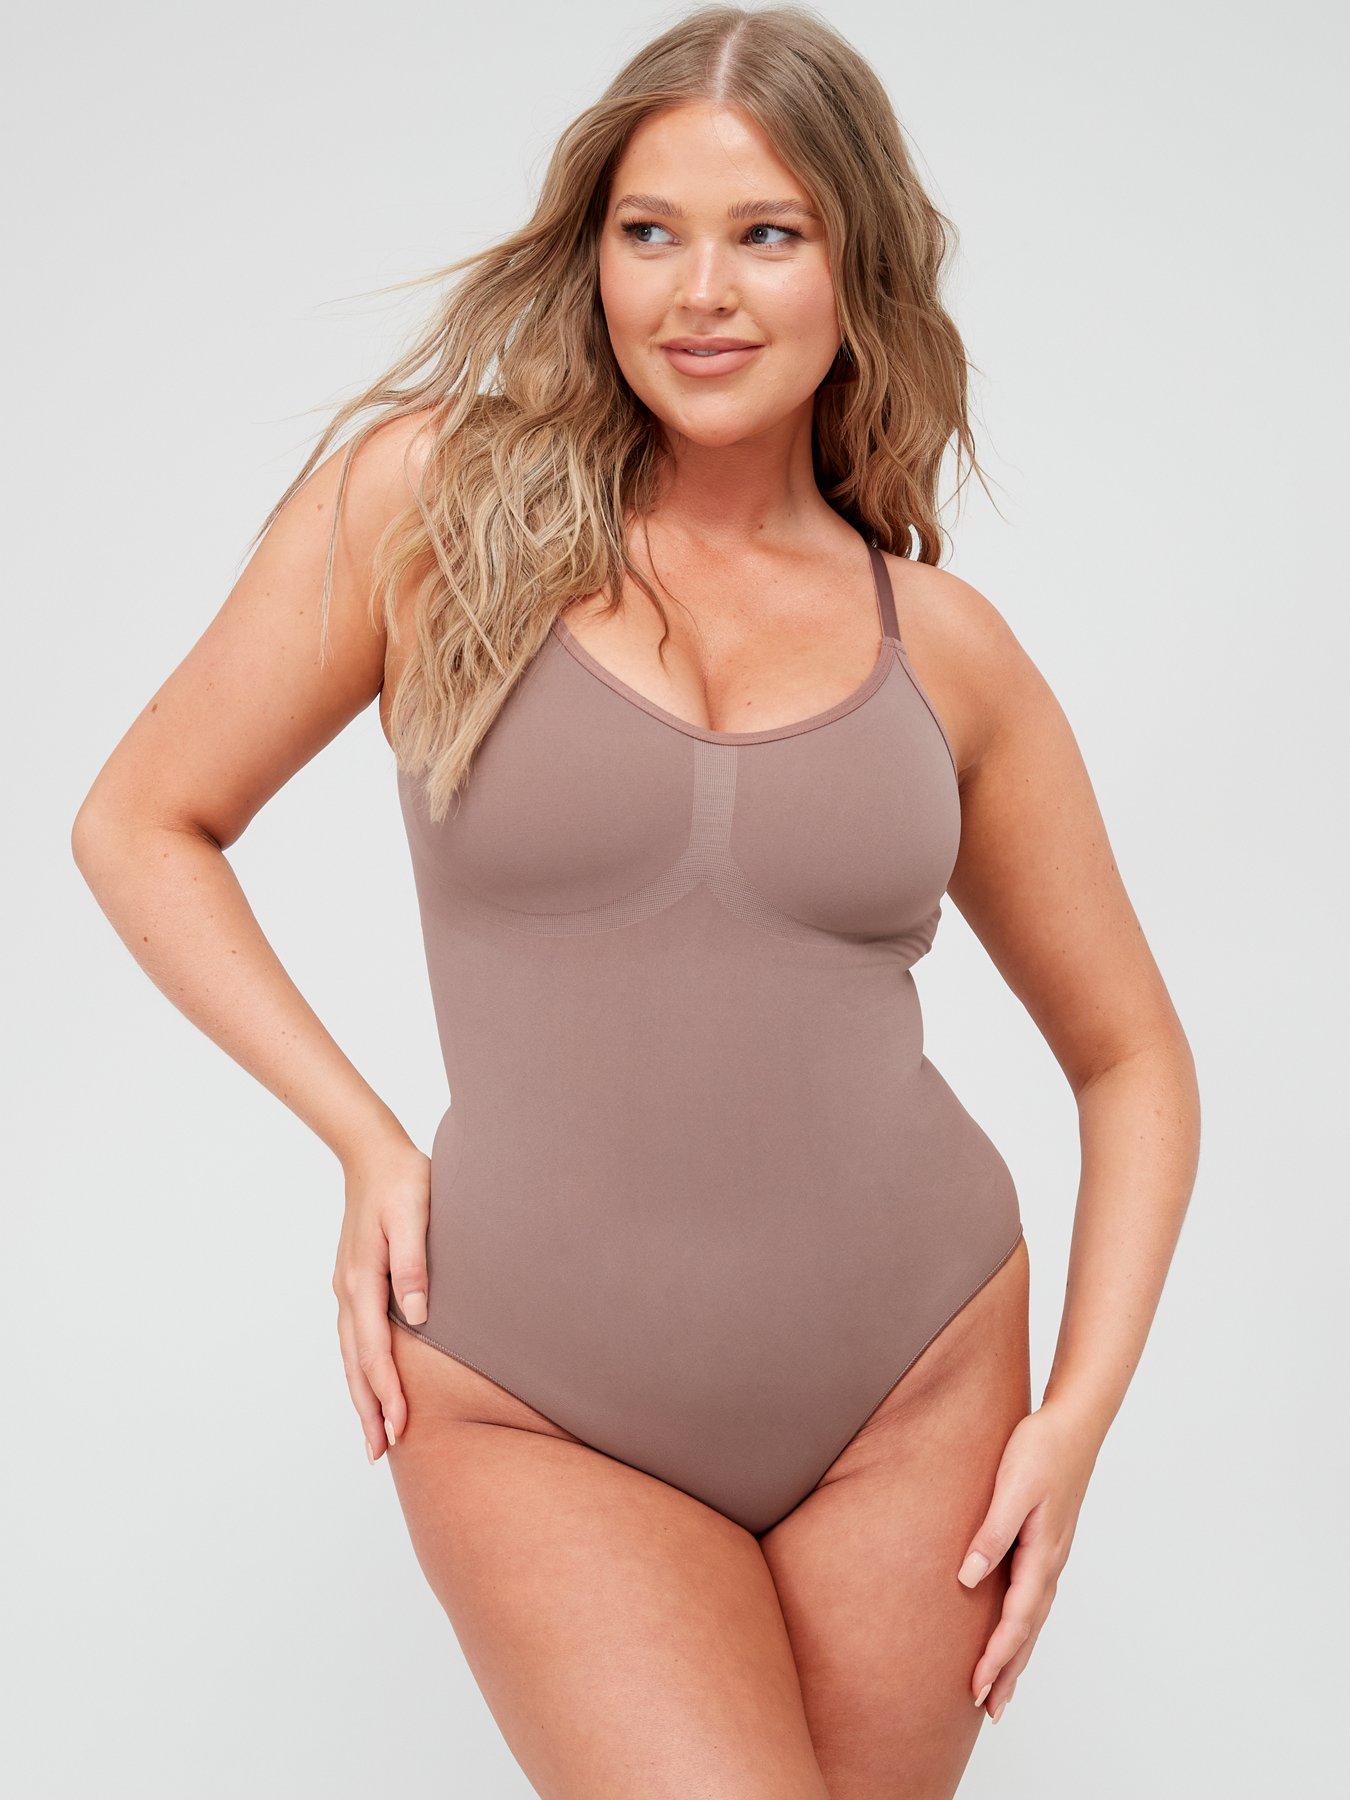 Women Breathable Shapewear Strong 3 Level Clasp Bodysuit With